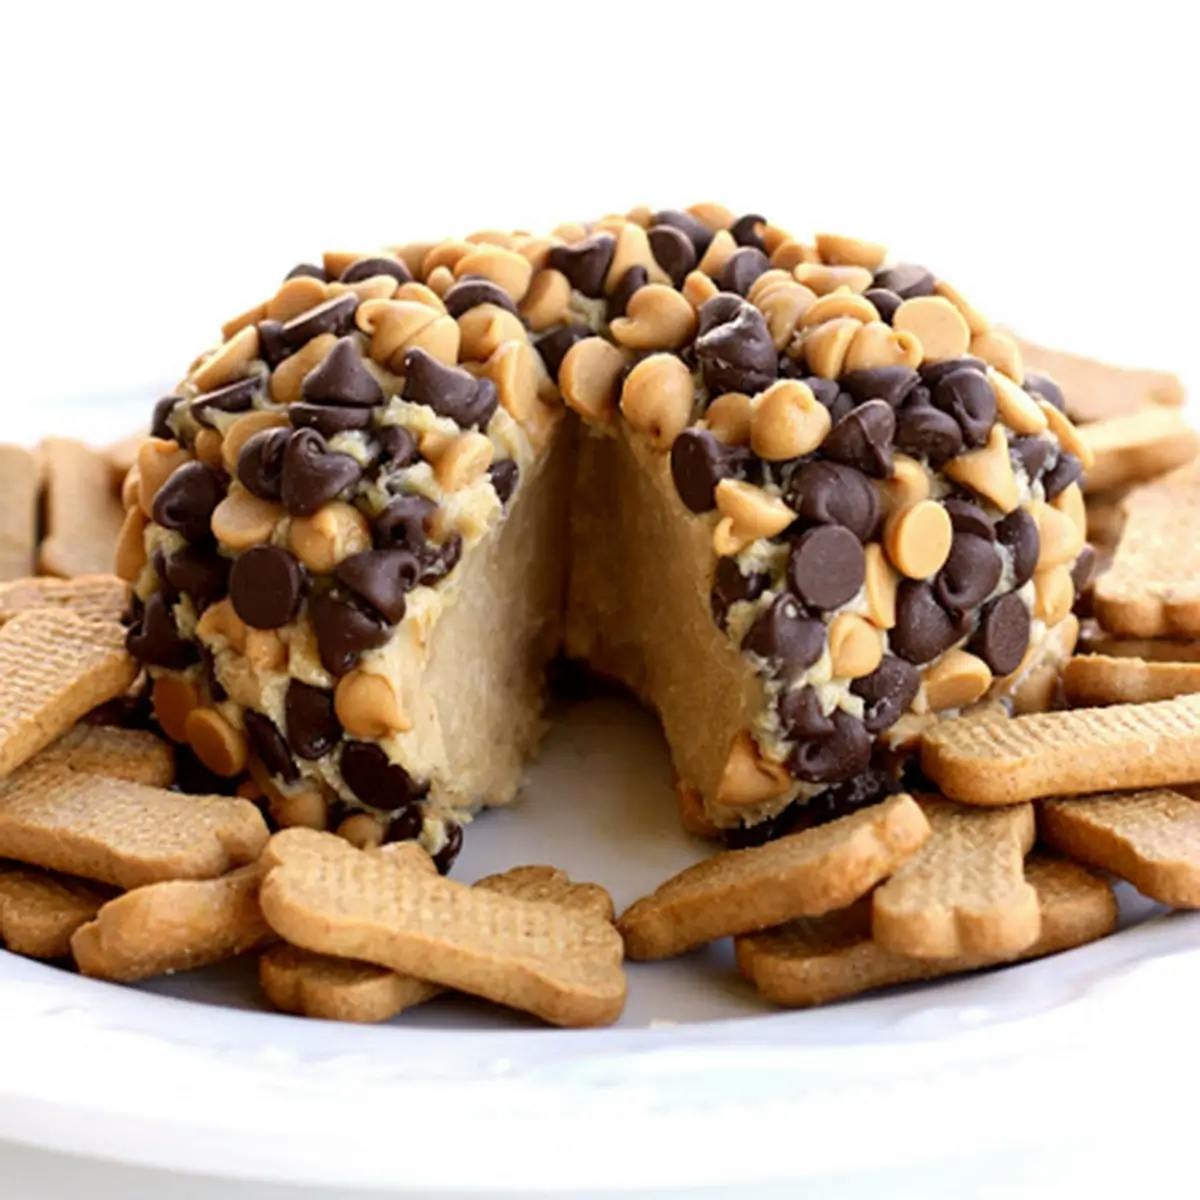 A peanut butter ball studded with chocolate chips, on a Christmas dessert charcuterie board.